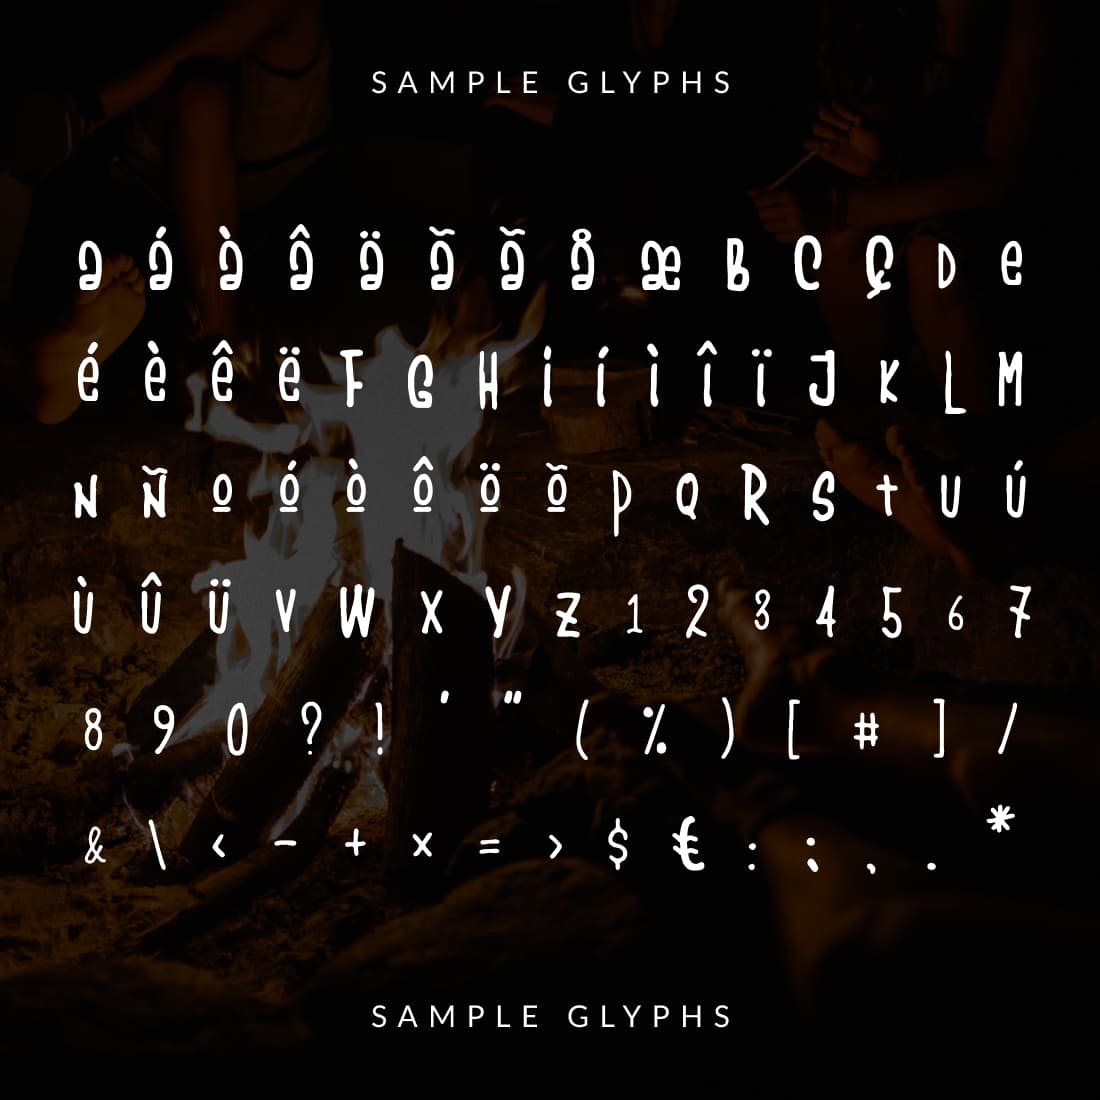 Free mexican font latino heart sample glyphs.